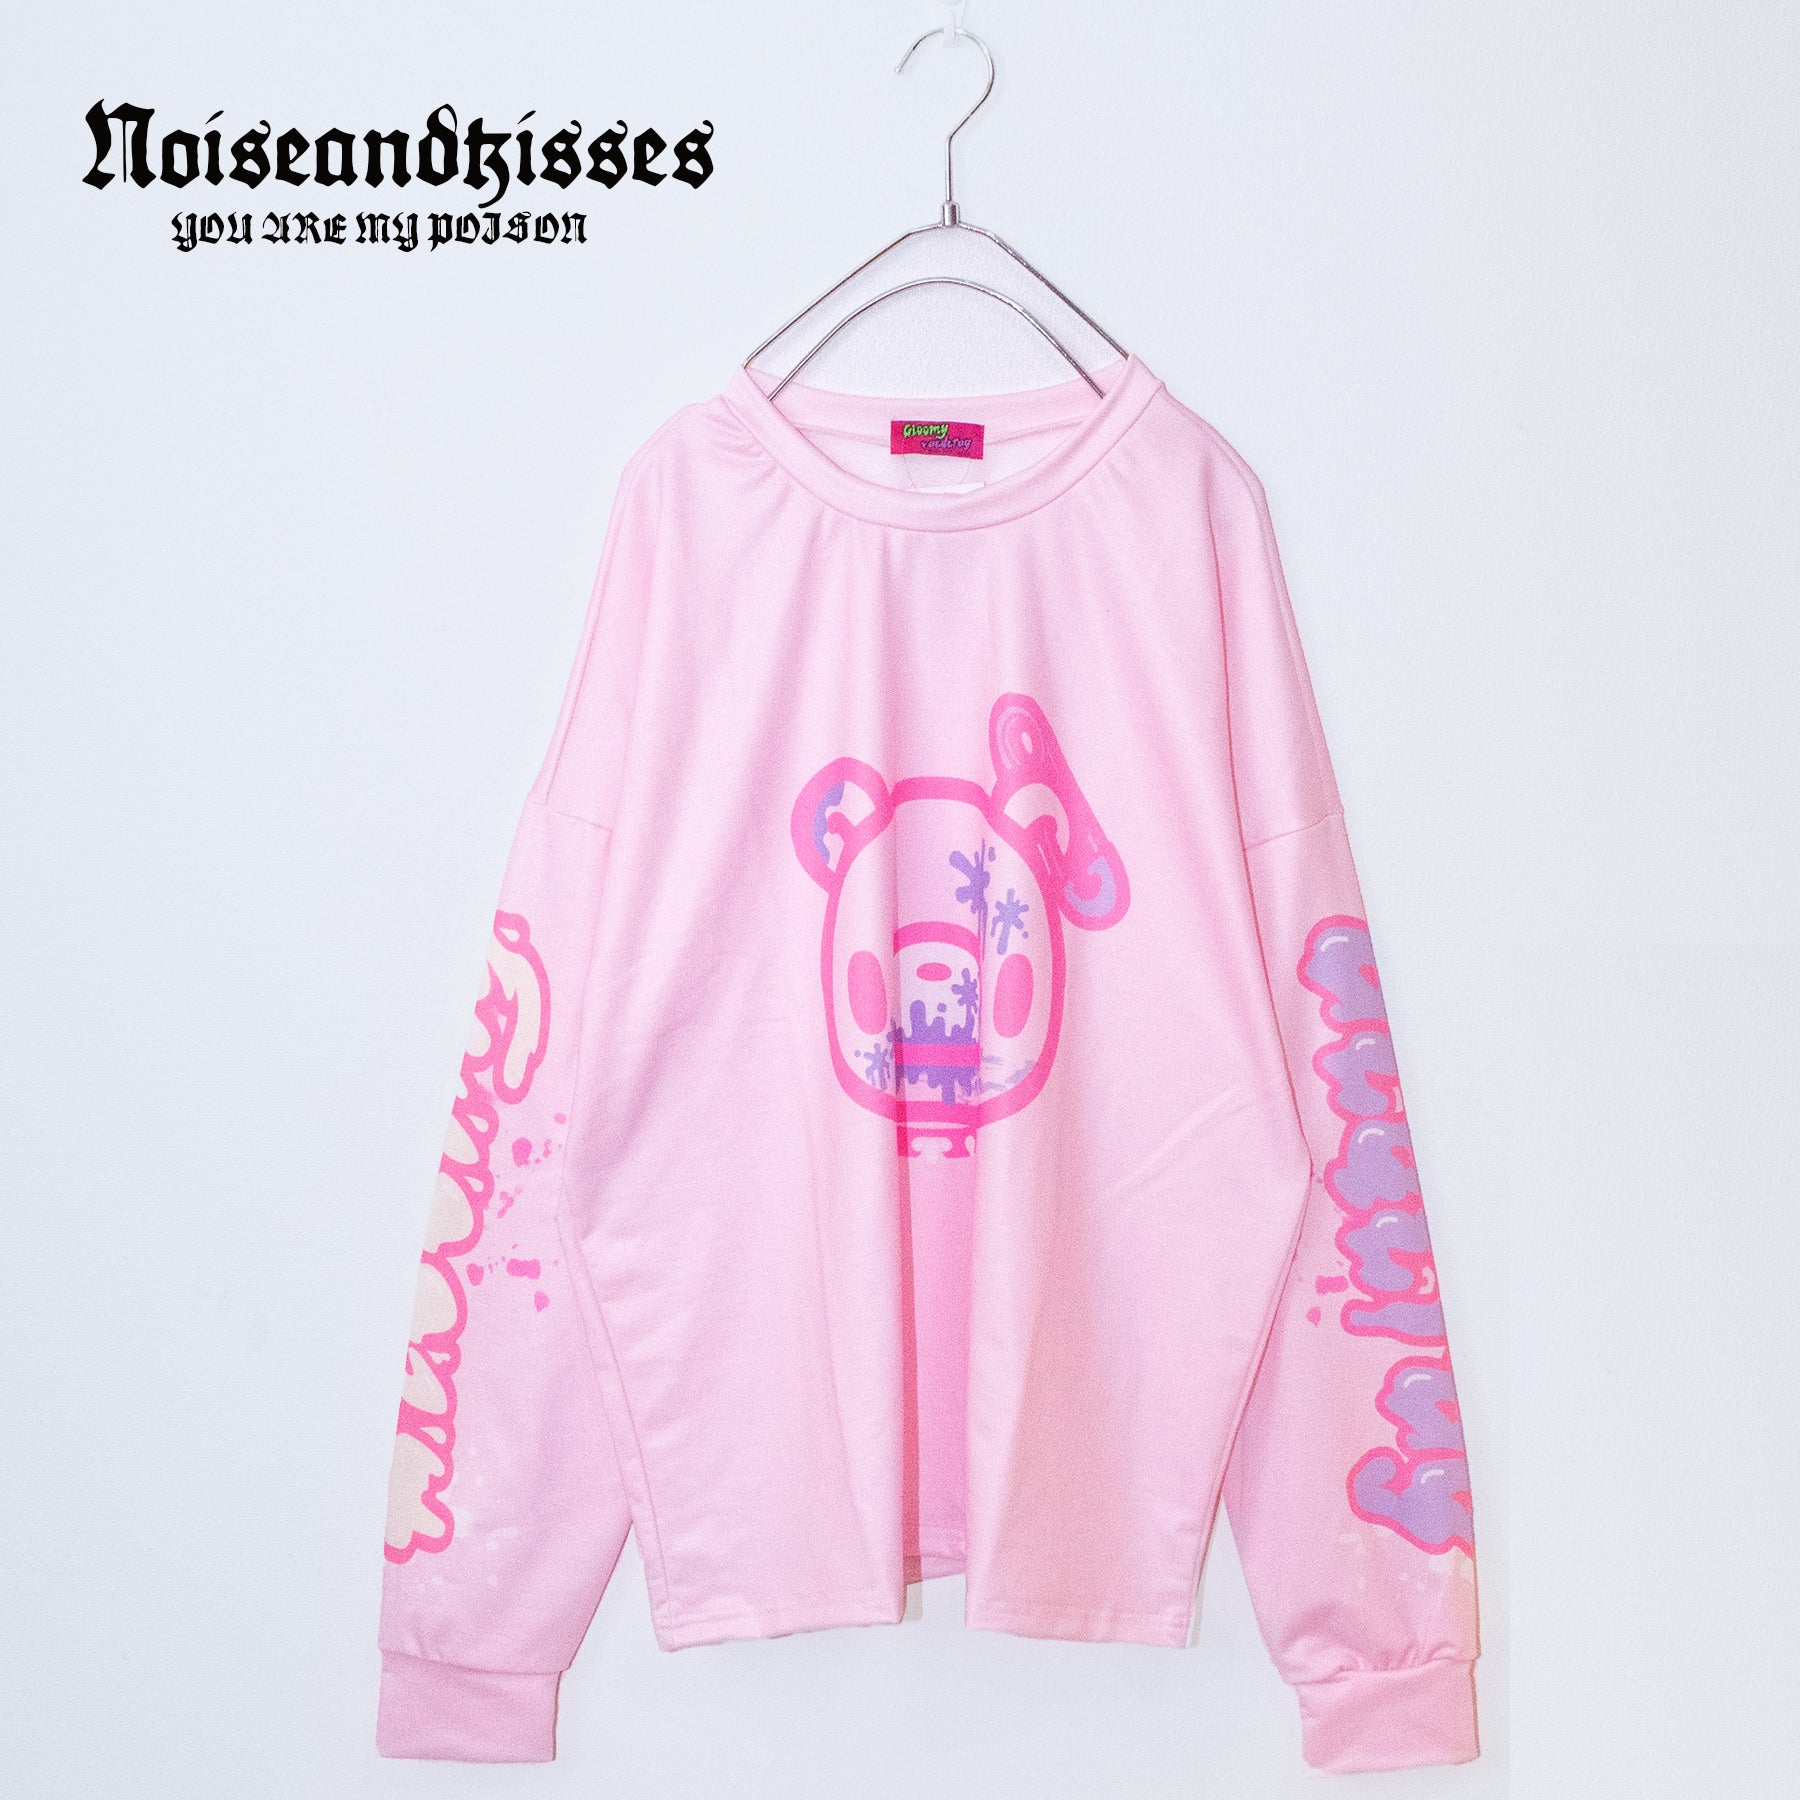 ACDC RAG Pastel Gloomy L/S T-shirt (Pink) - YOUAREMYPOISON